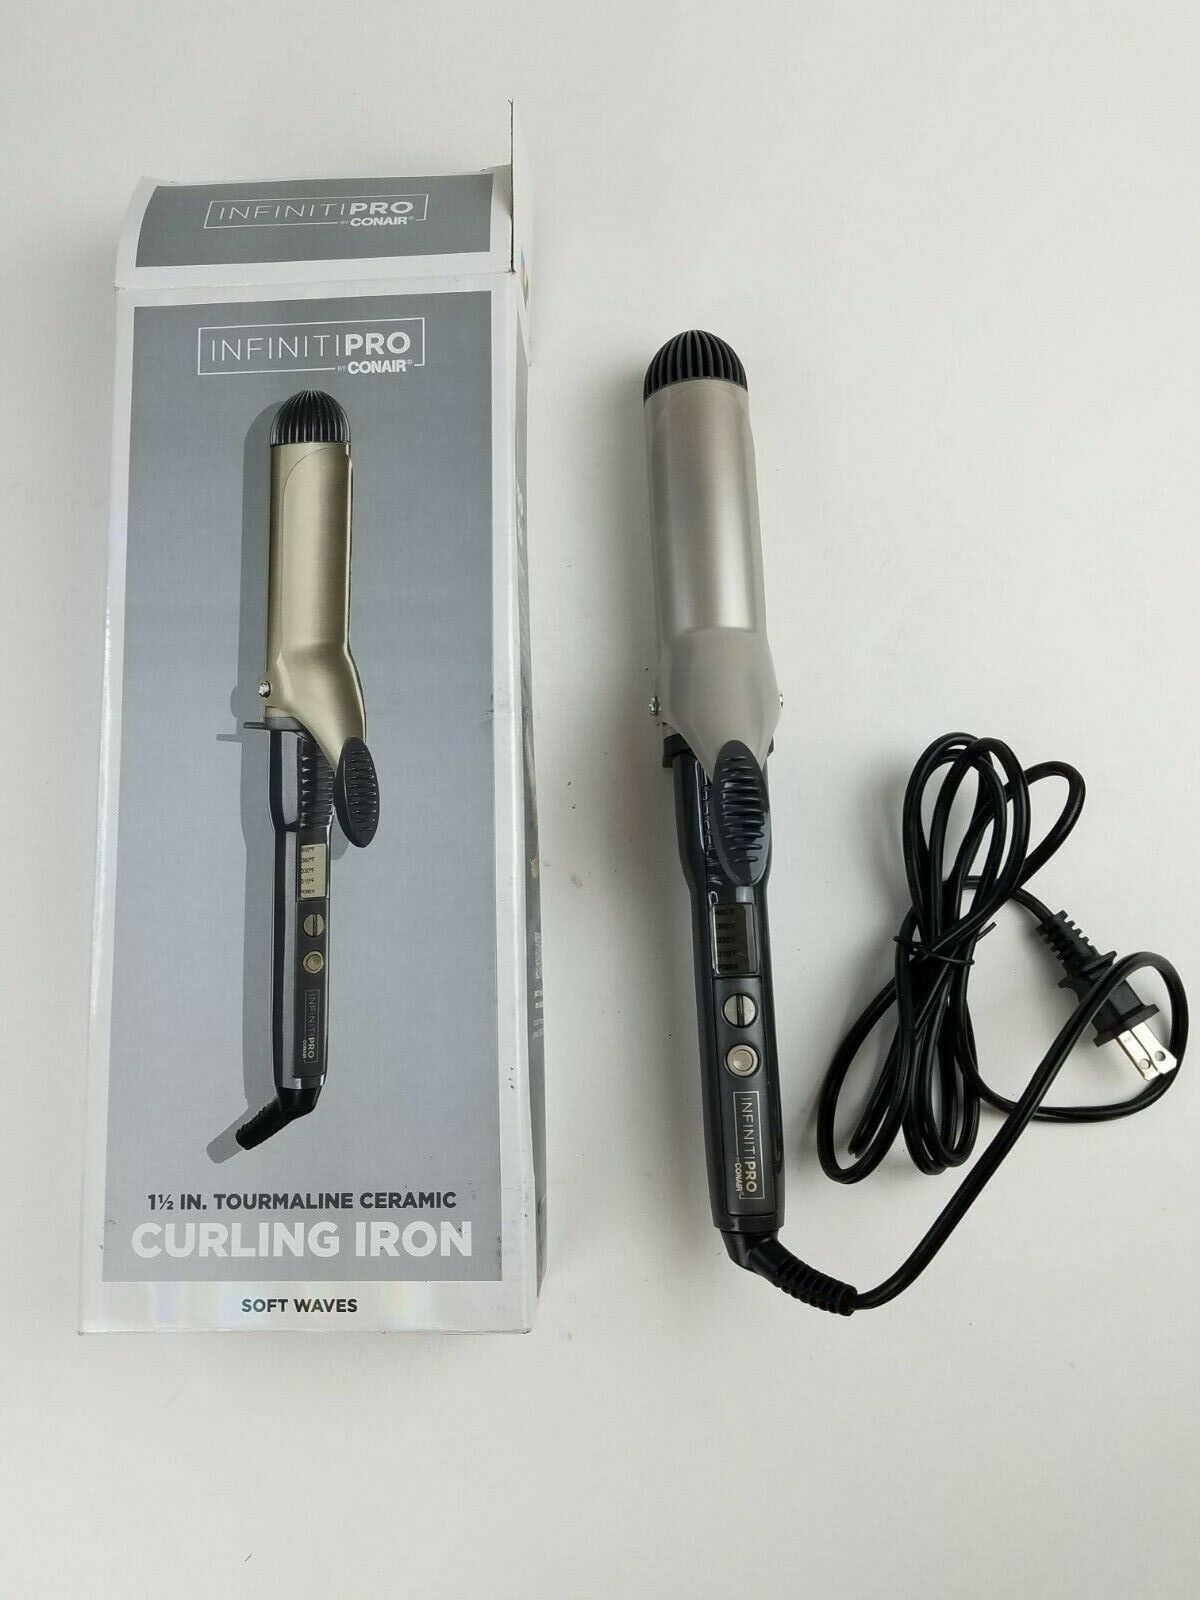 Primary image for INFINITIPRO BY CONAIR Tourmaline 1 1/2-Inch Ceramic Curling Iron